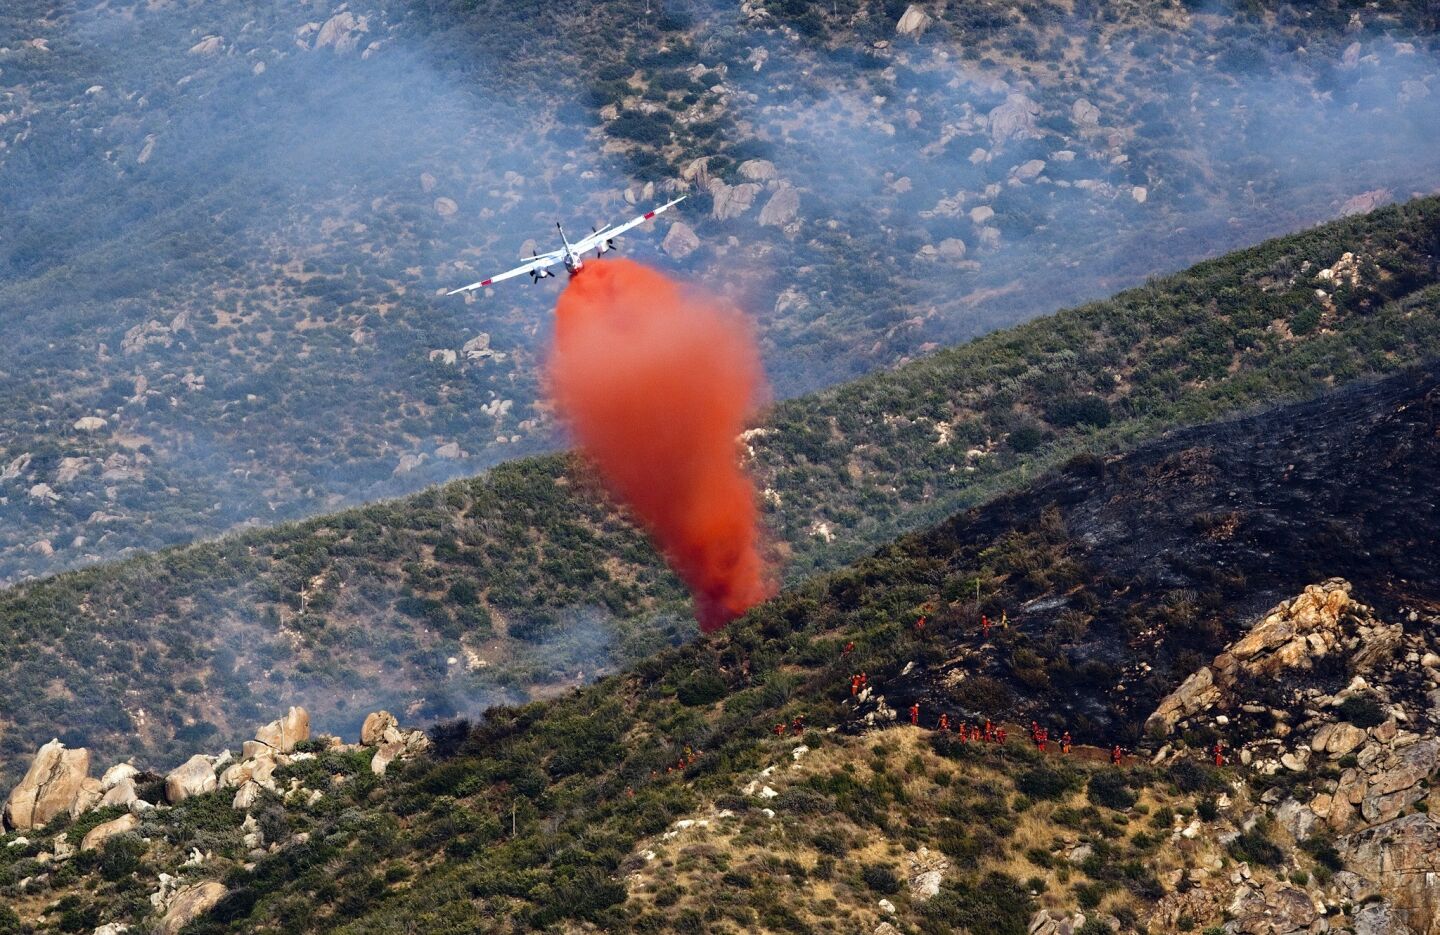 An air tanker drops fire retardant near fire crews in rugged, steep terrain to battle the Gorgonio fire off Highway 243 in Banning. As of 6:30 p.m., the fire was 20% contained at 650 acres. Seven air tankers and two helicopters were on the scene.